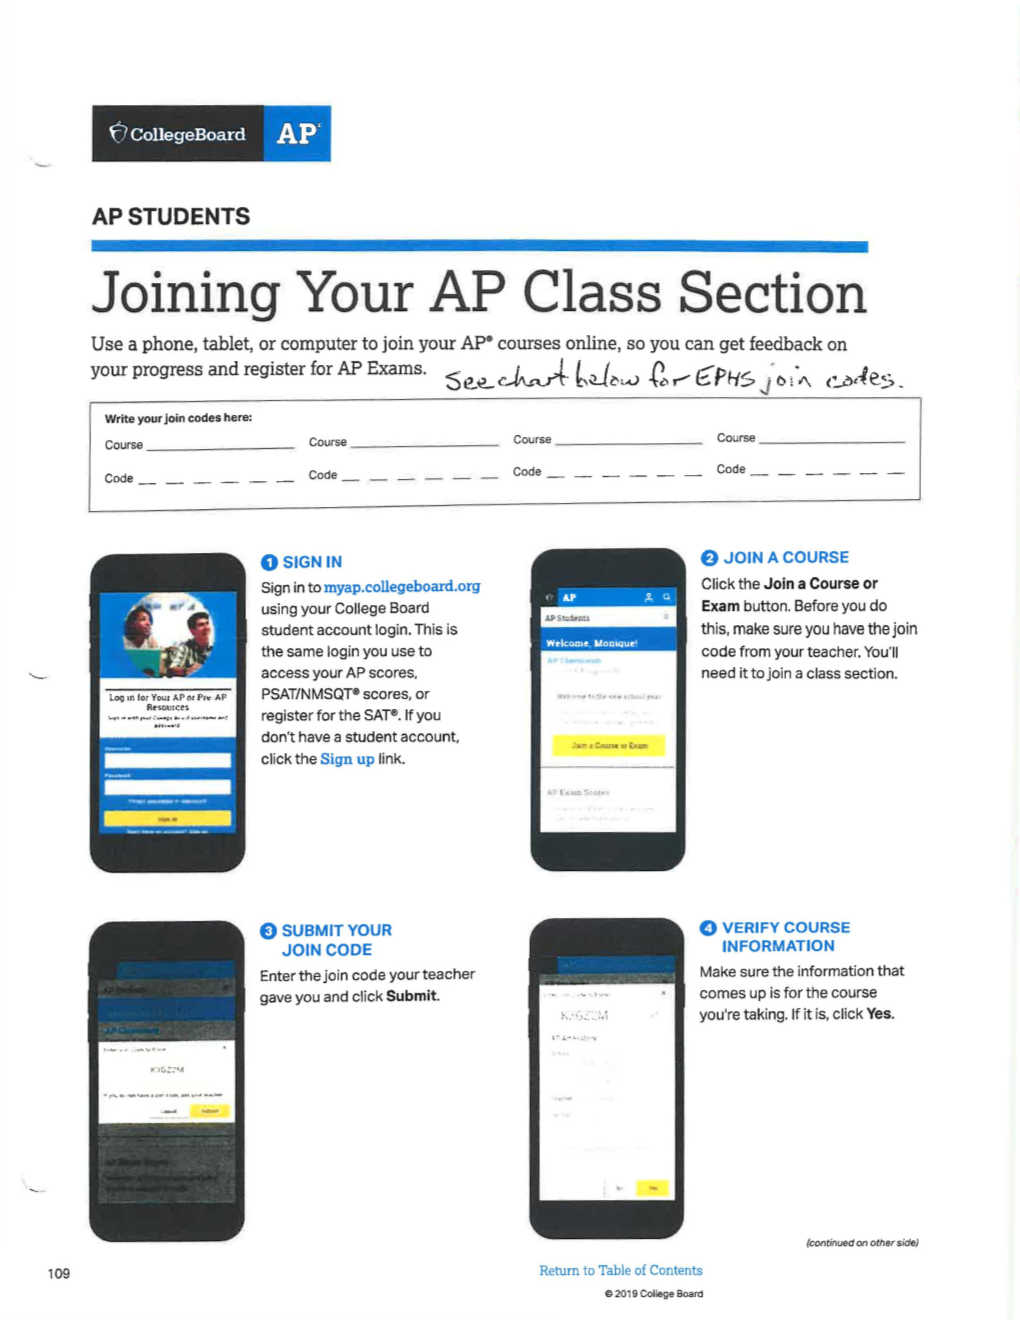 Joining Your AP Class Section Use a Phone, Tablet, Or Computer to Join Your AP® Courses Online, So You Can Get Feedback On